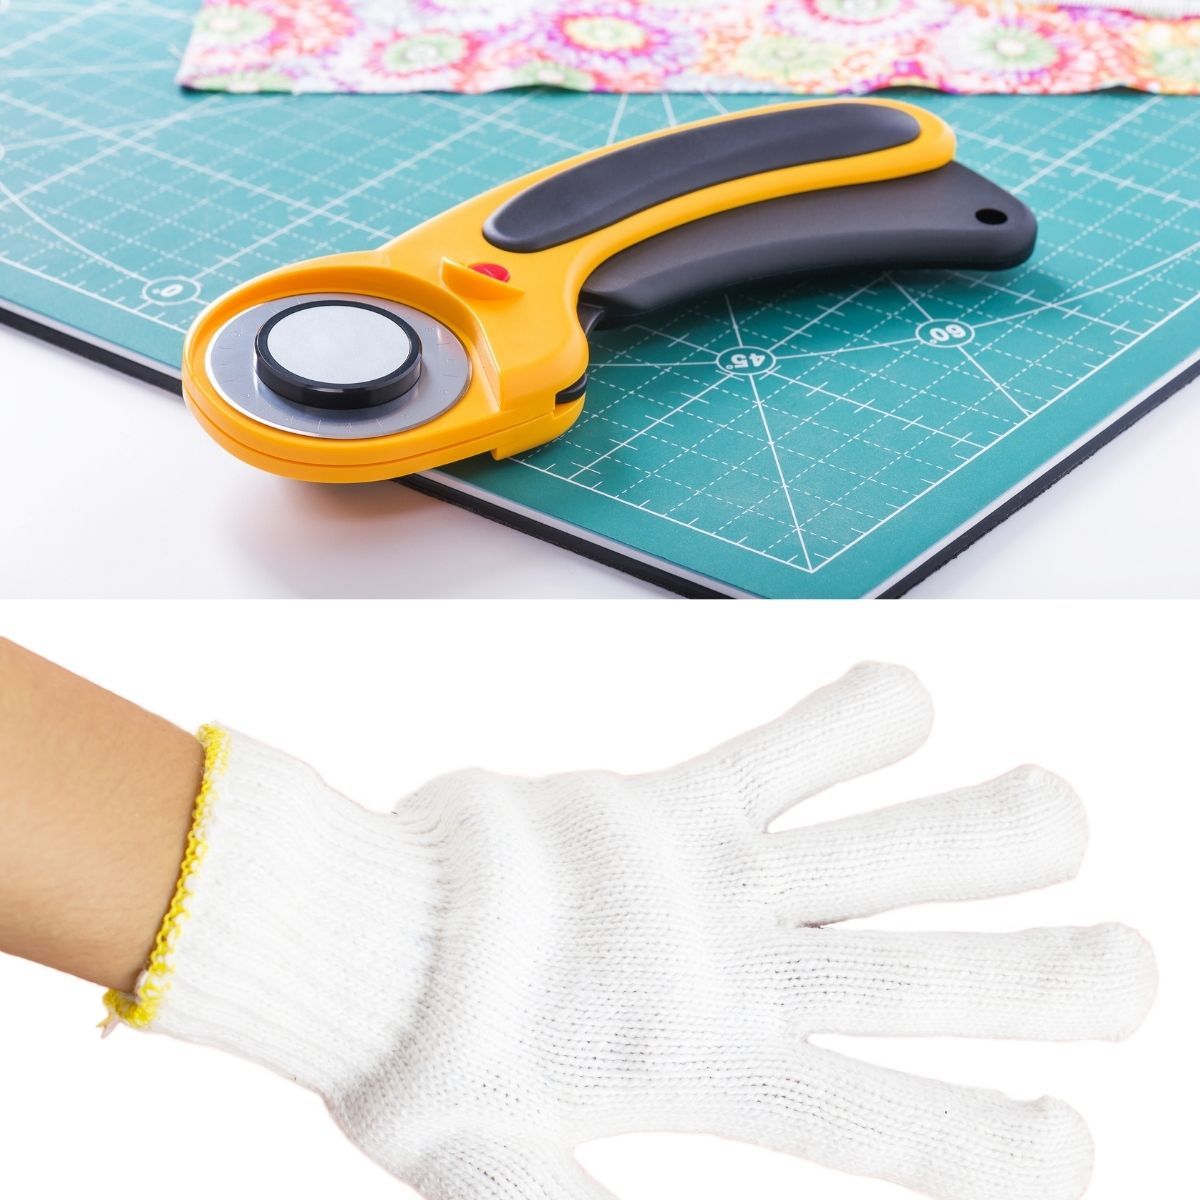 Cutting tools for sewing safety